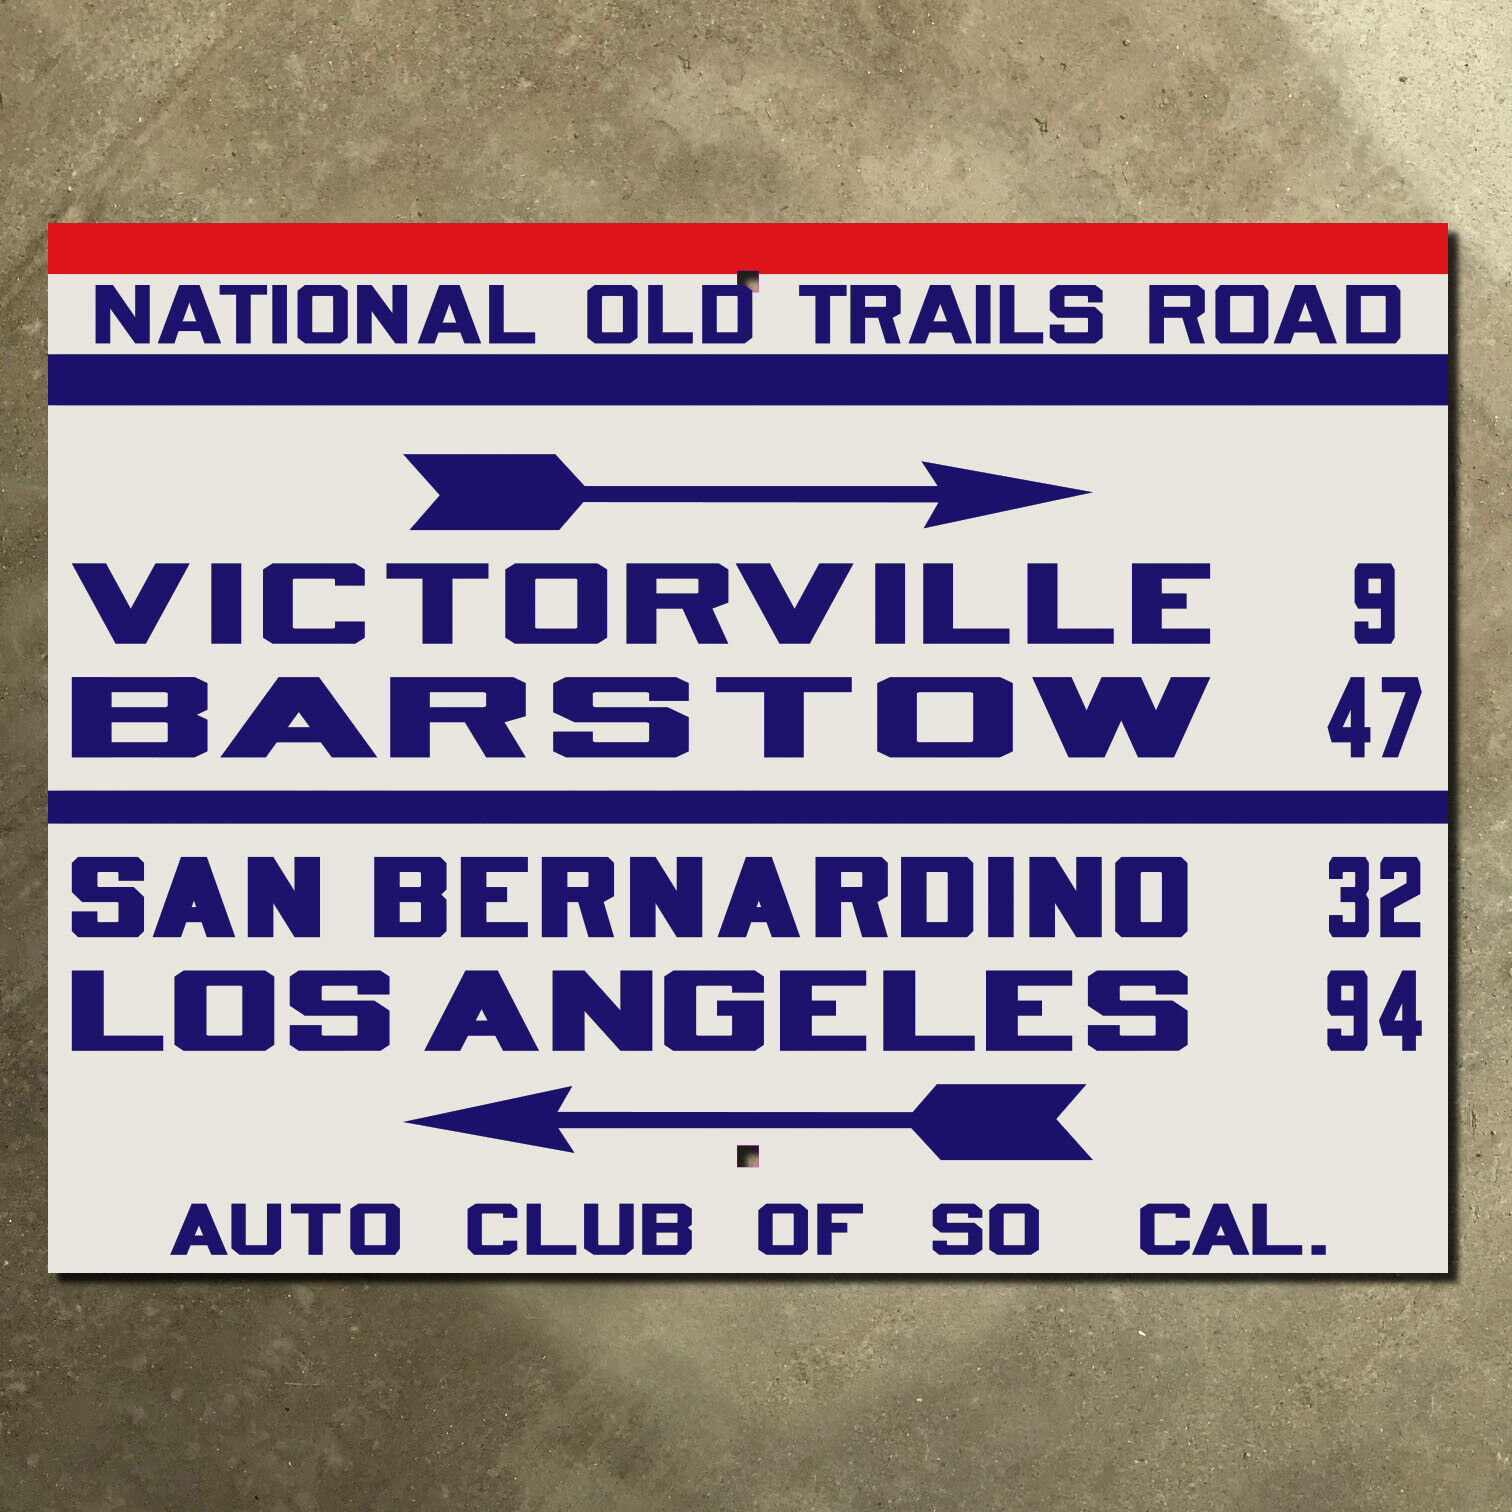 ACSC Victorville Barstow National Old Trails Road route 66 highway sign 20x15